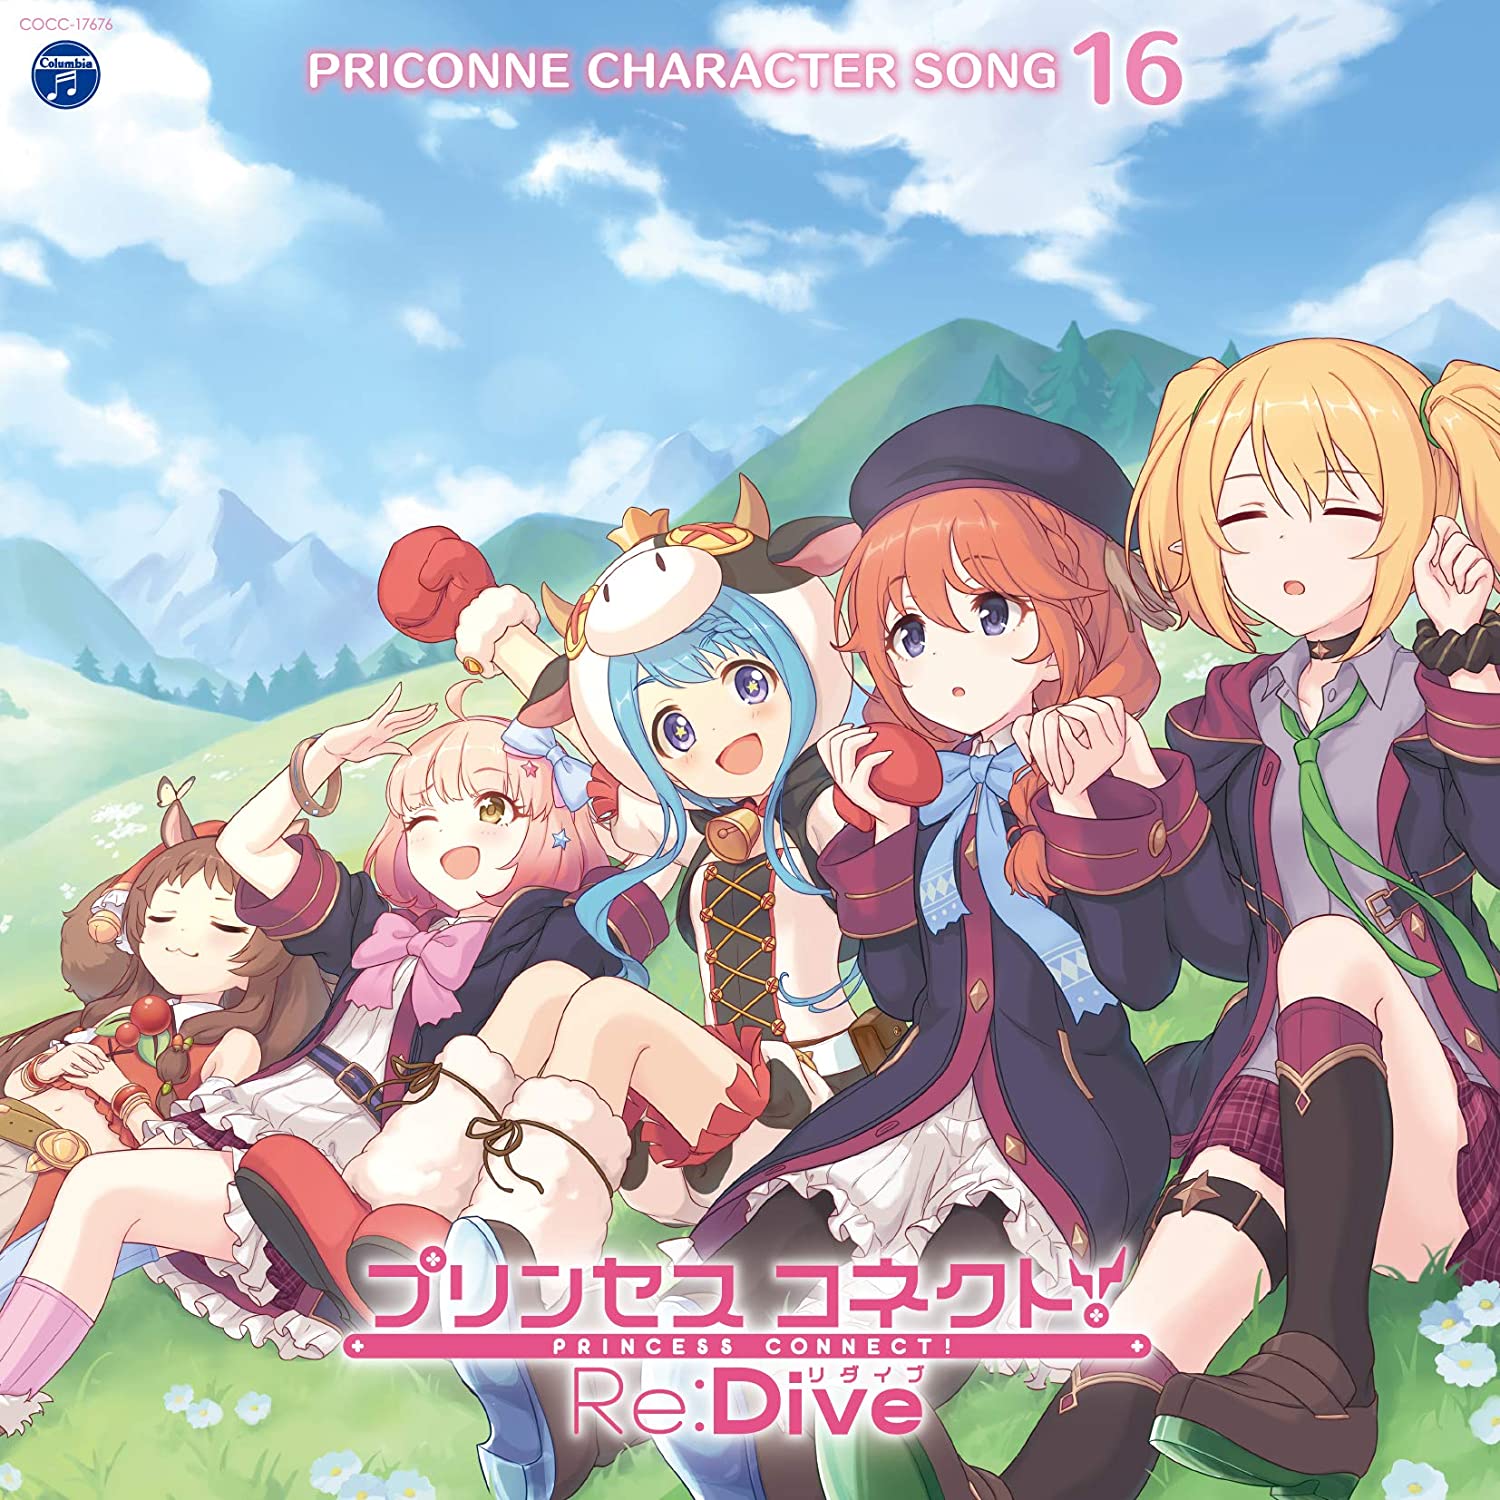 PRICONNE CHARACTER SONG 16.jpg